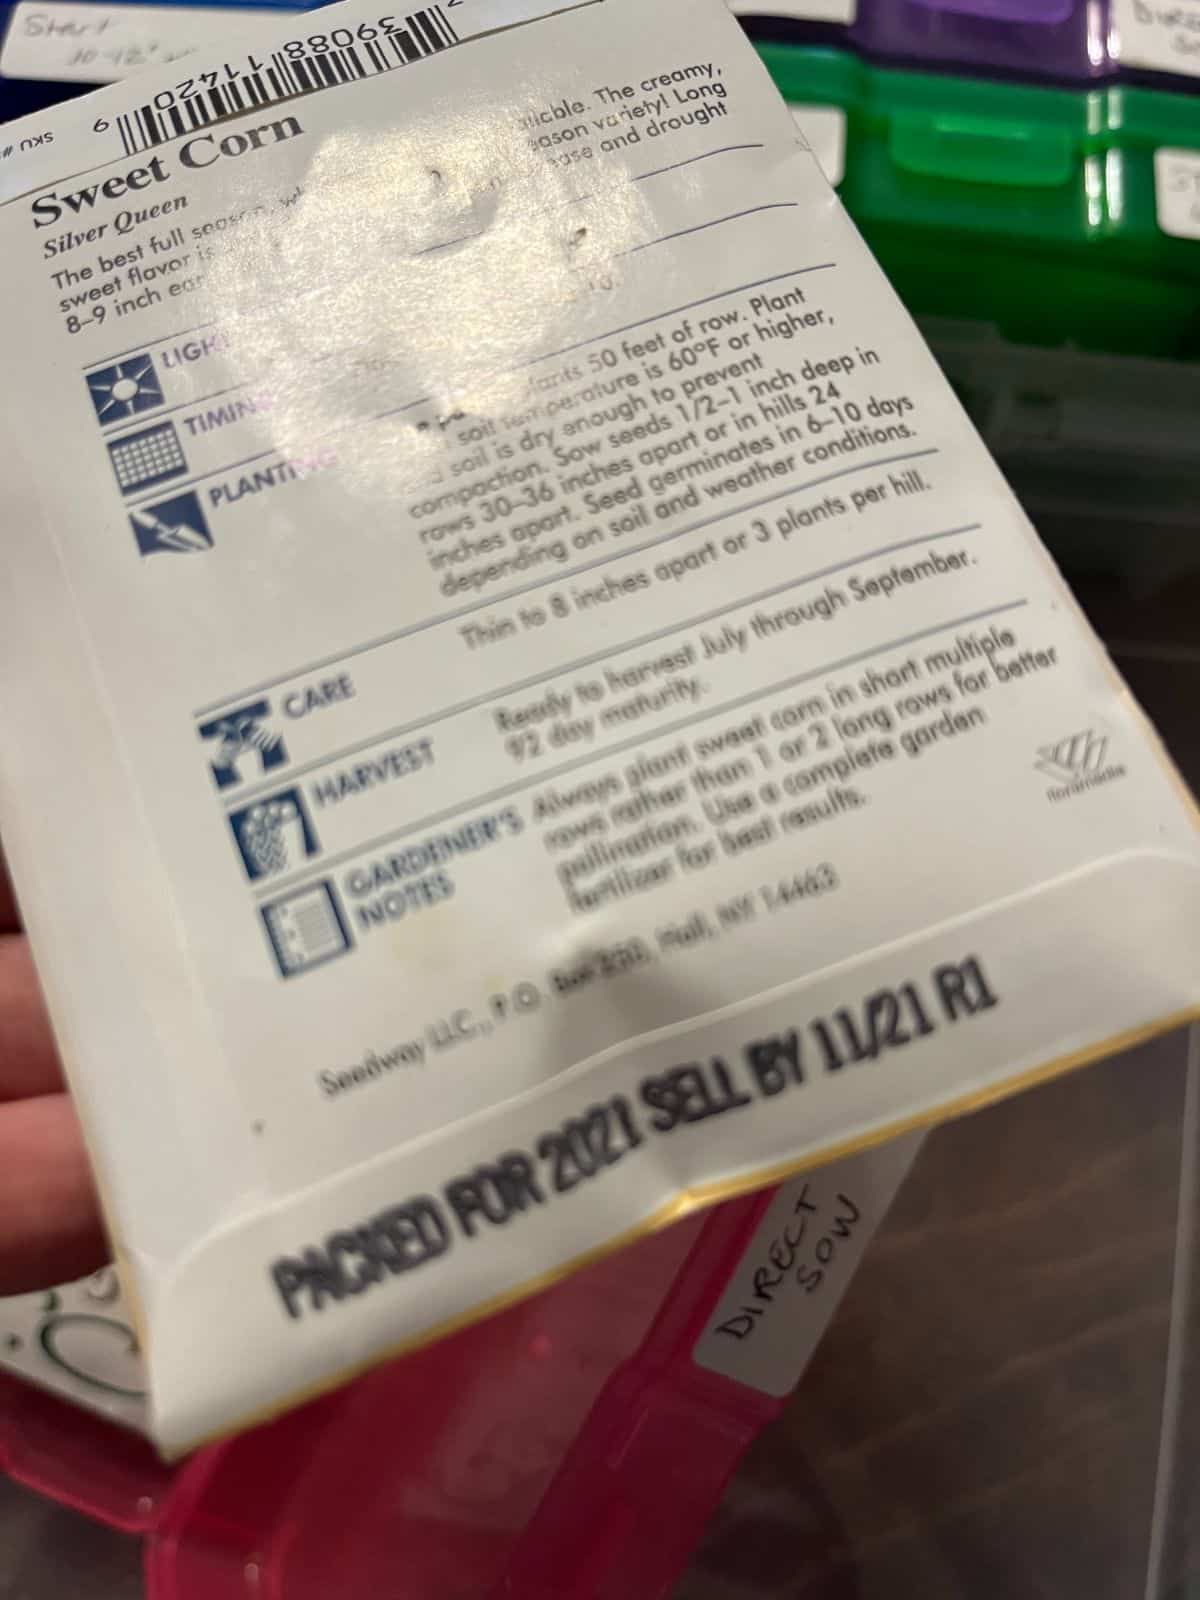 A combined "Packed for" and "Sell By" date on a seed package.